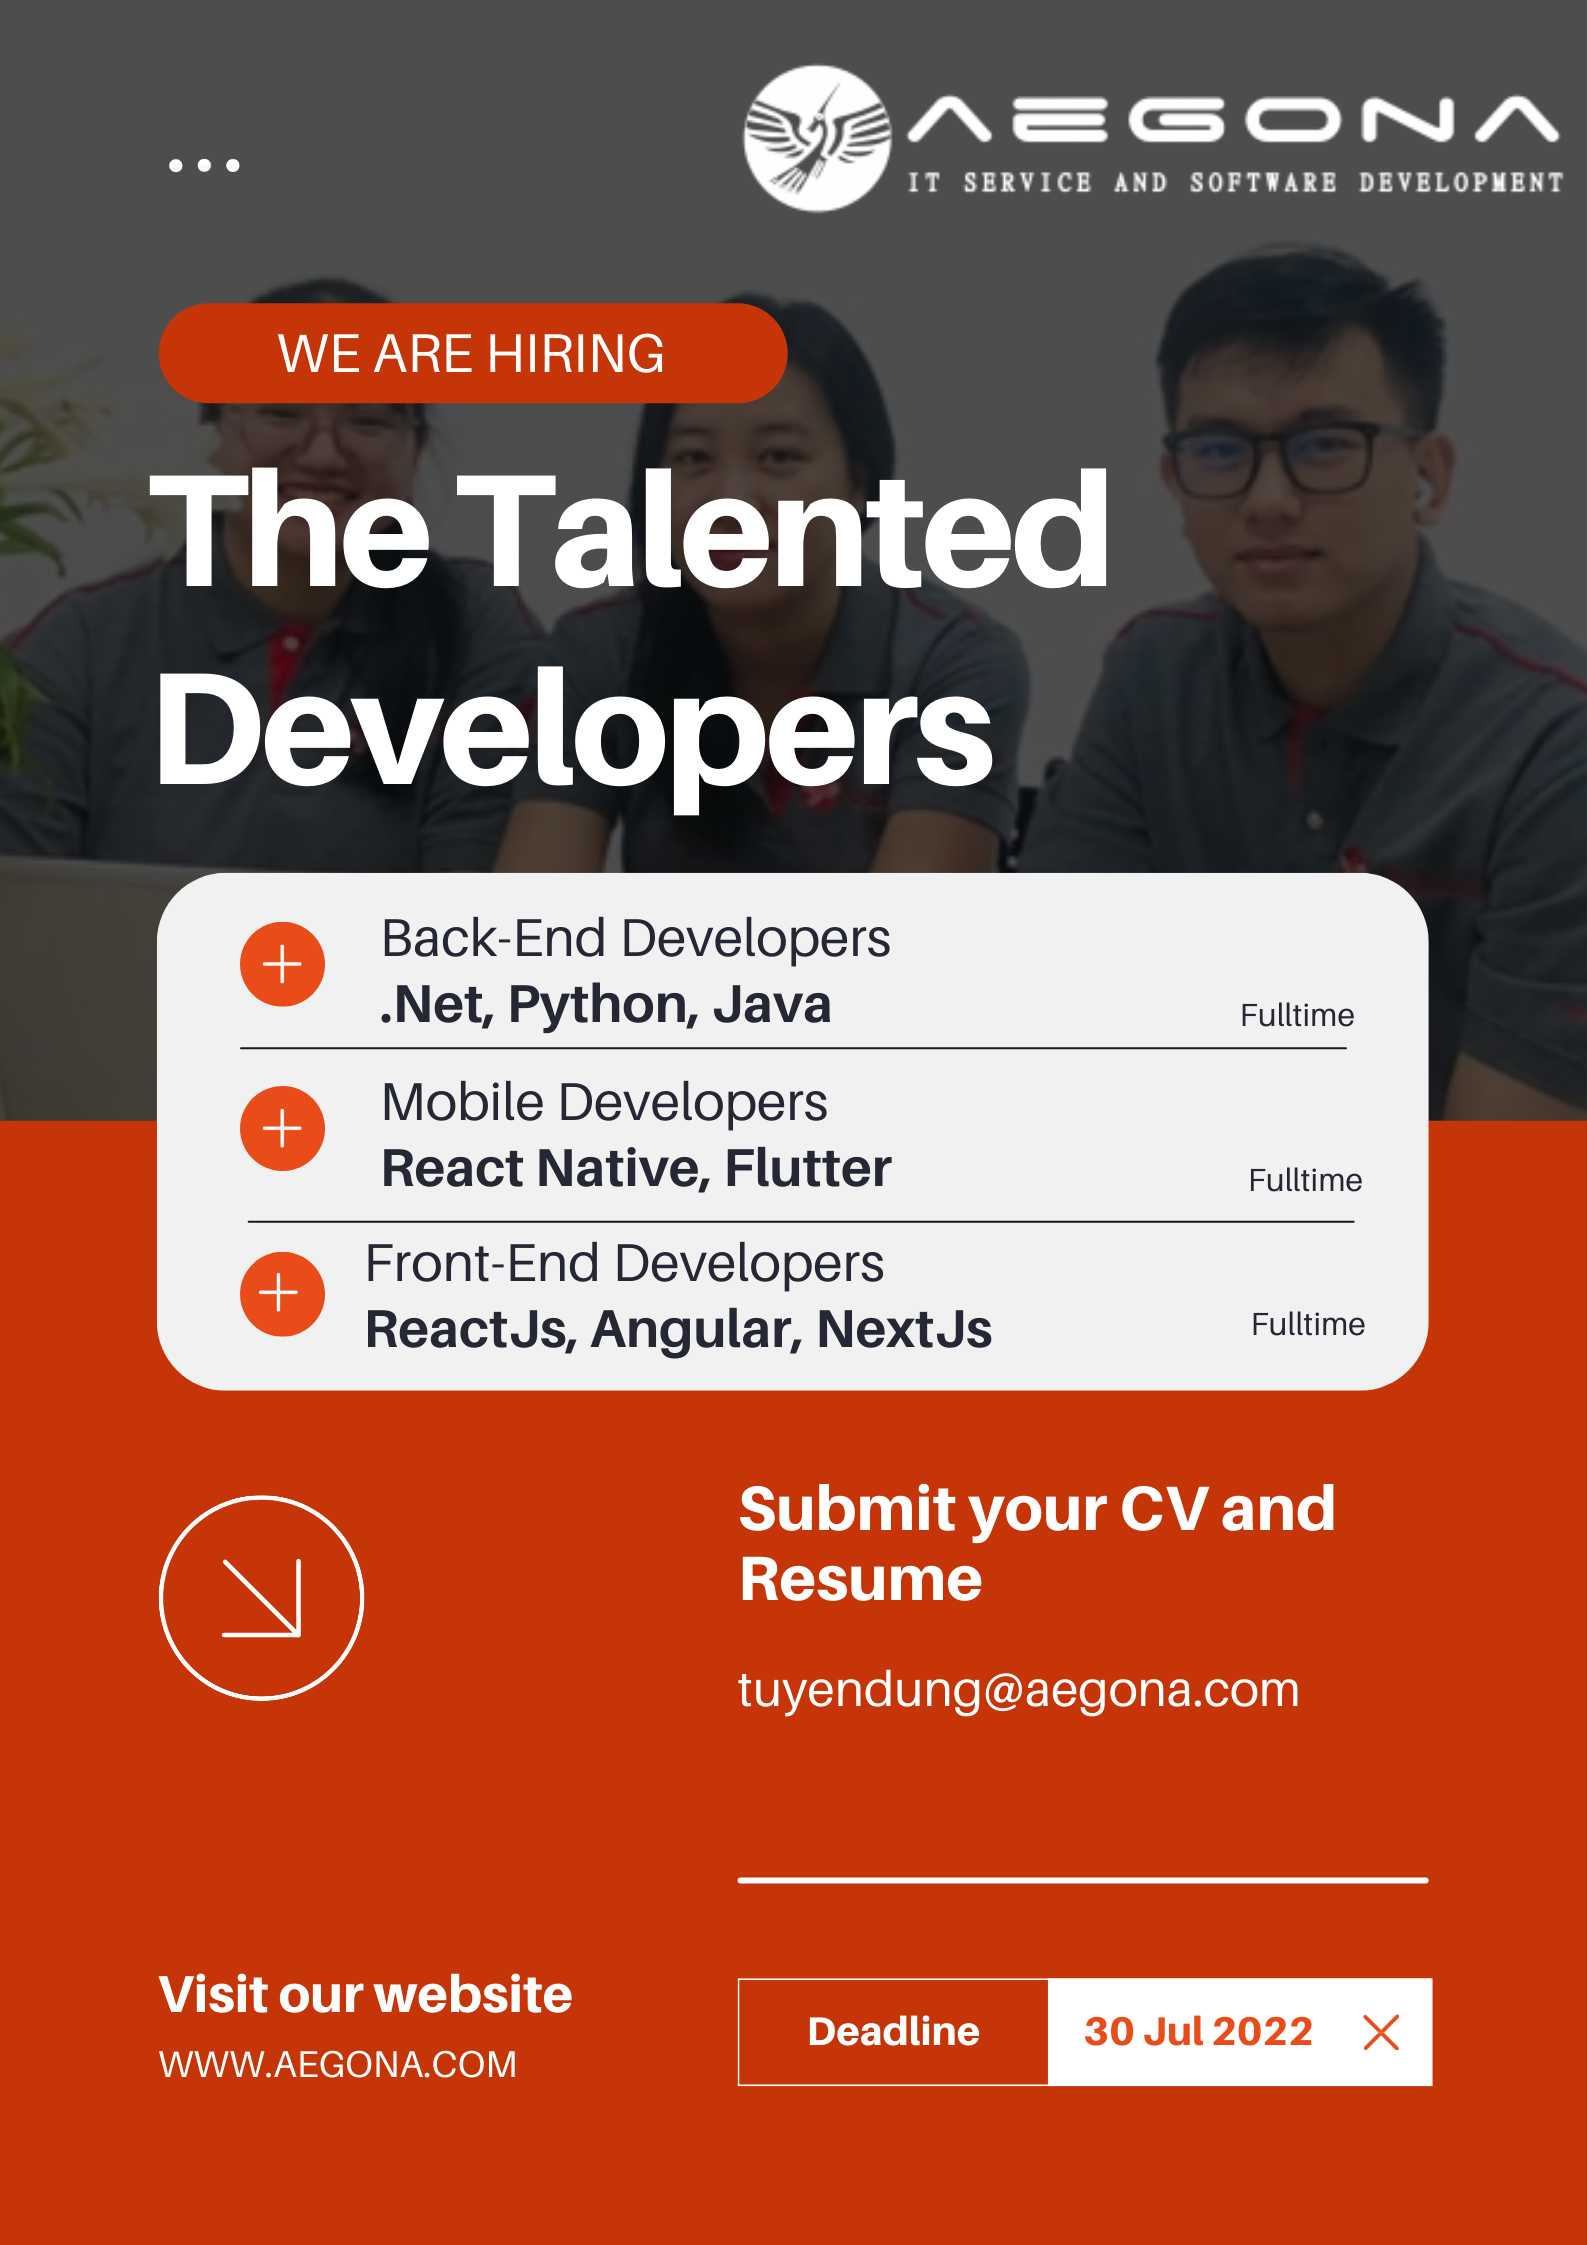 Aegona Ltd is looking for talented developers